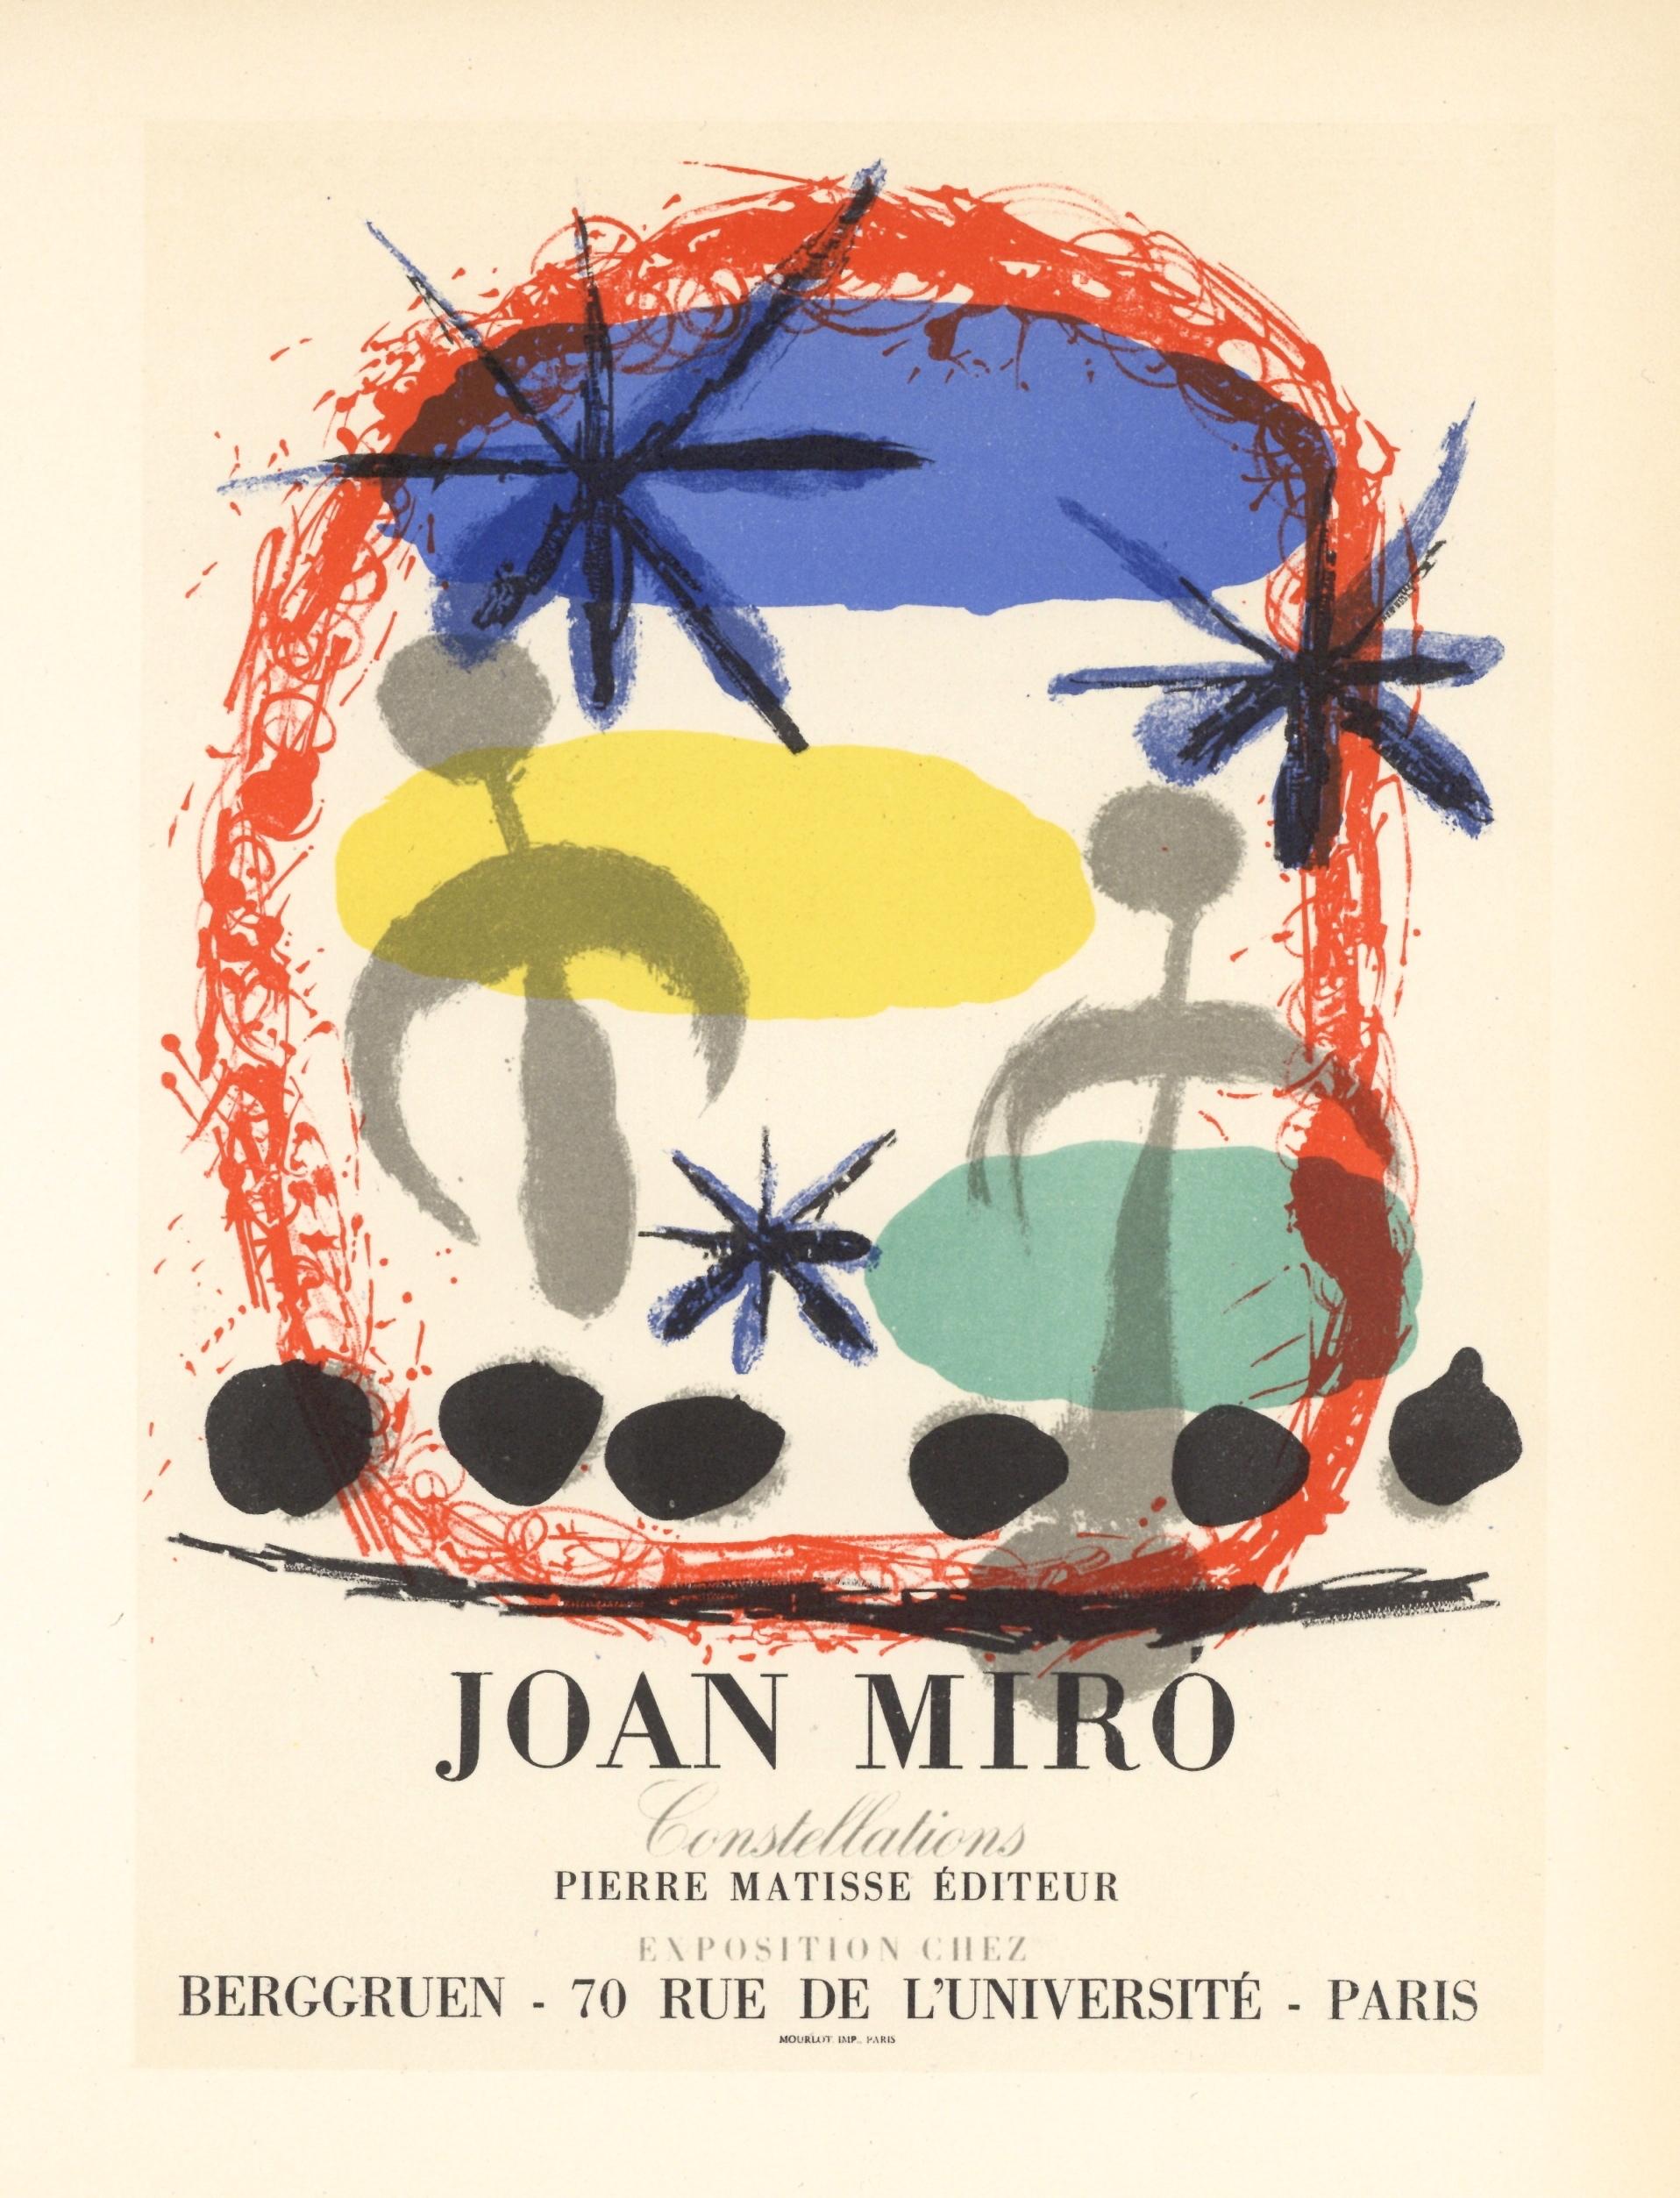 "Constellations" lithograph poster - Print by (after) Joan Miró